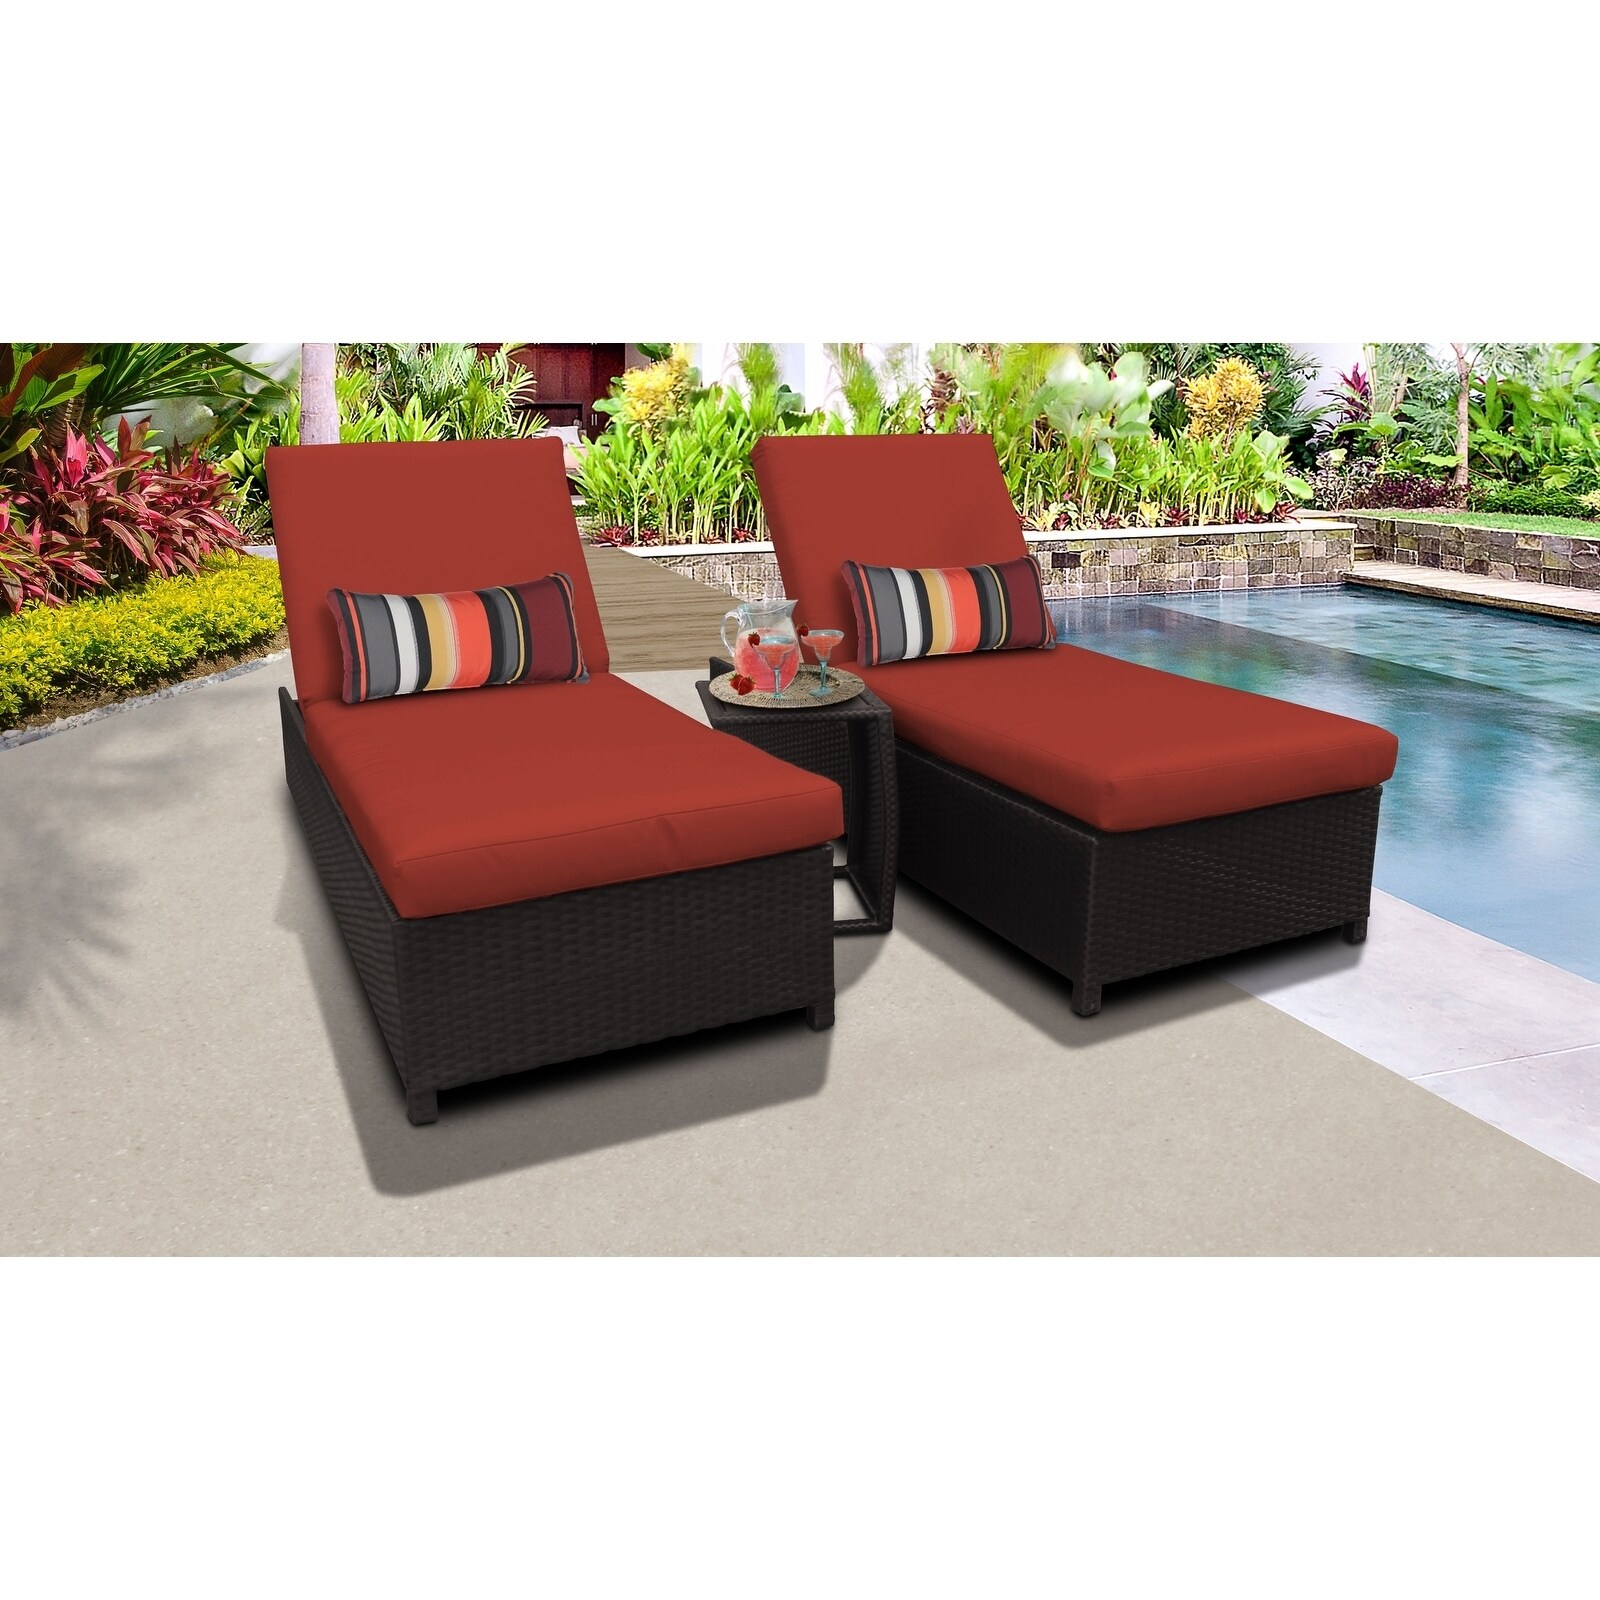 Belle Wheeled Chaise Set Of 2 Outdoor Wicker Patio Furniture And Side Table